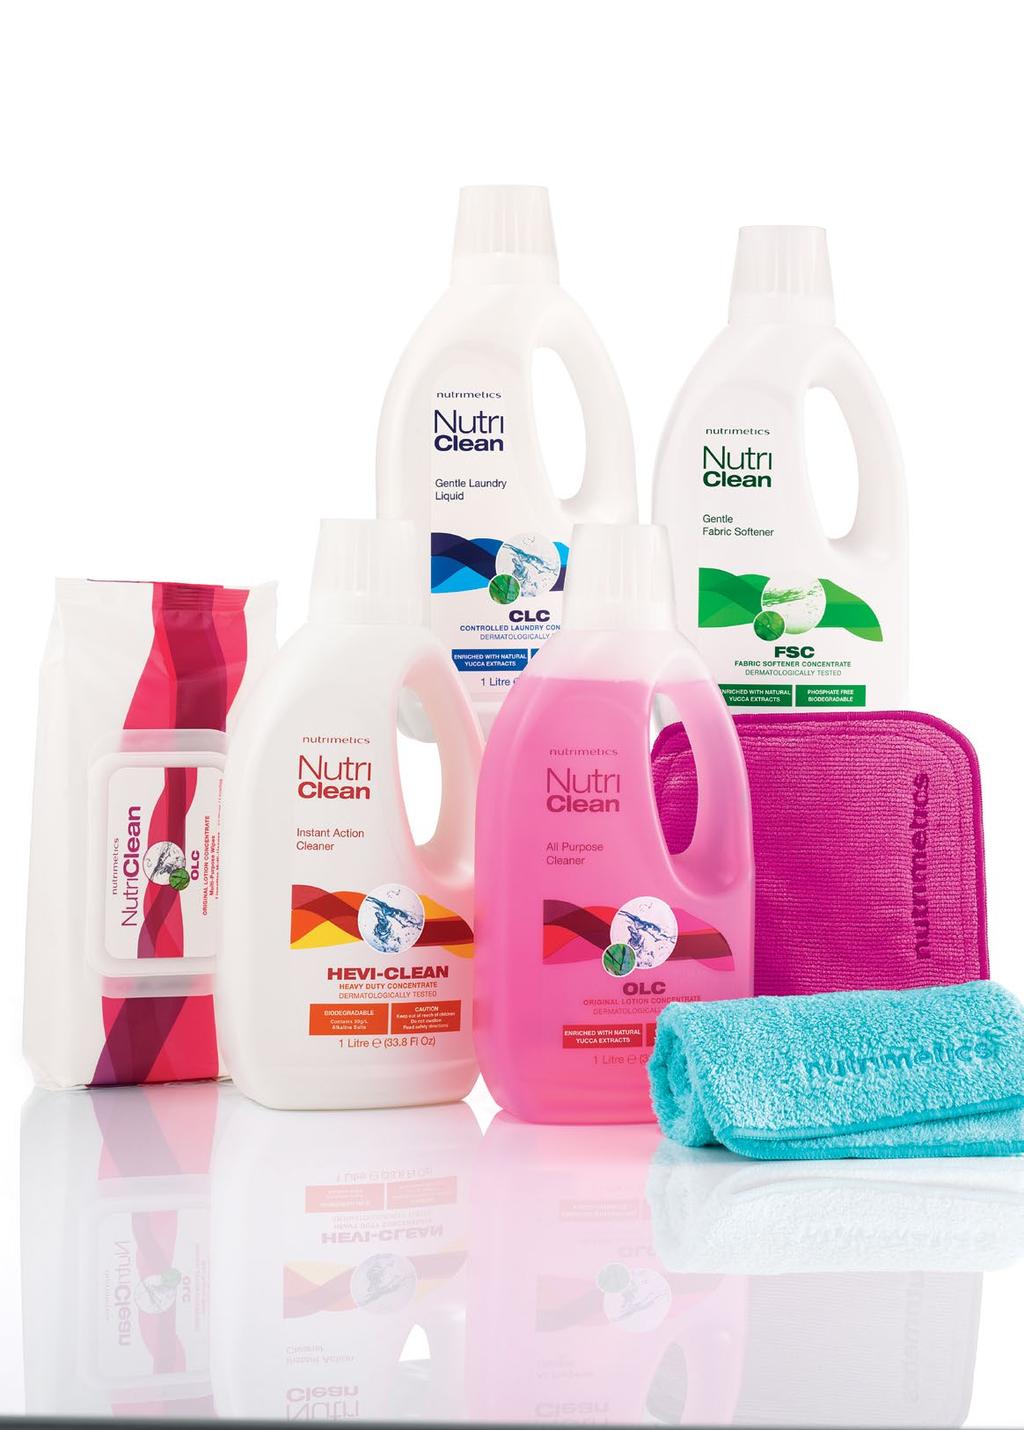 FOR EVERYWHERE Your total eco-friendly cleaning toolkit The complete home cleaning kit includes everything for your household cleaning needs, to help you take the hard work out of keeping your home